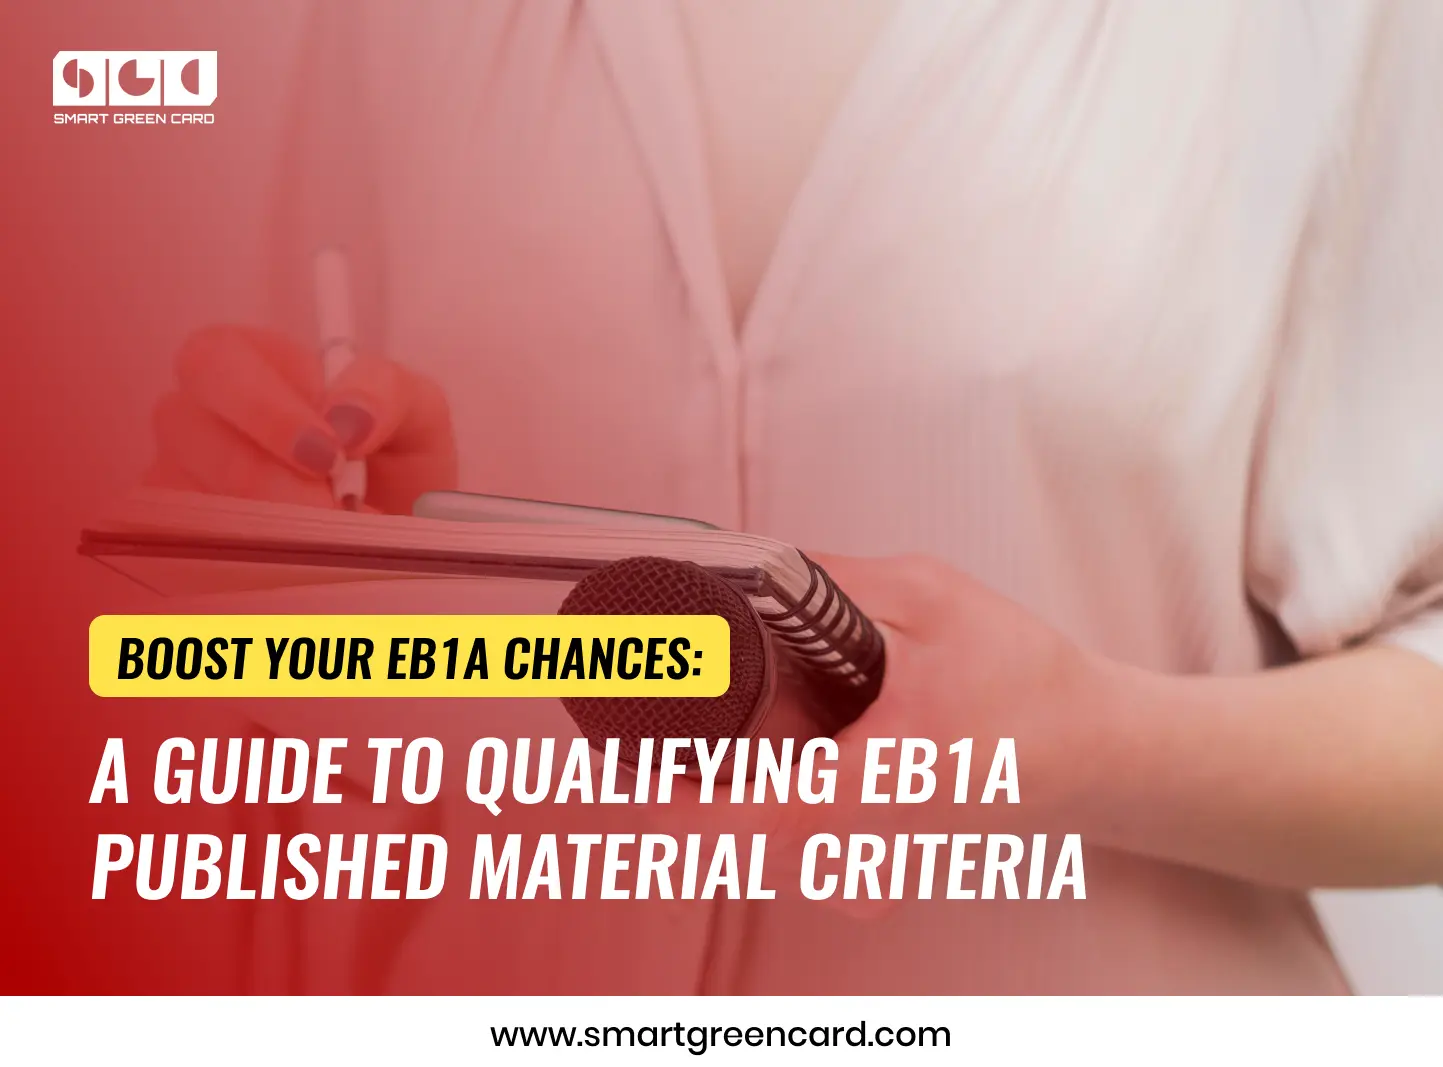 Guide to Meet EB1A published Material Criteria